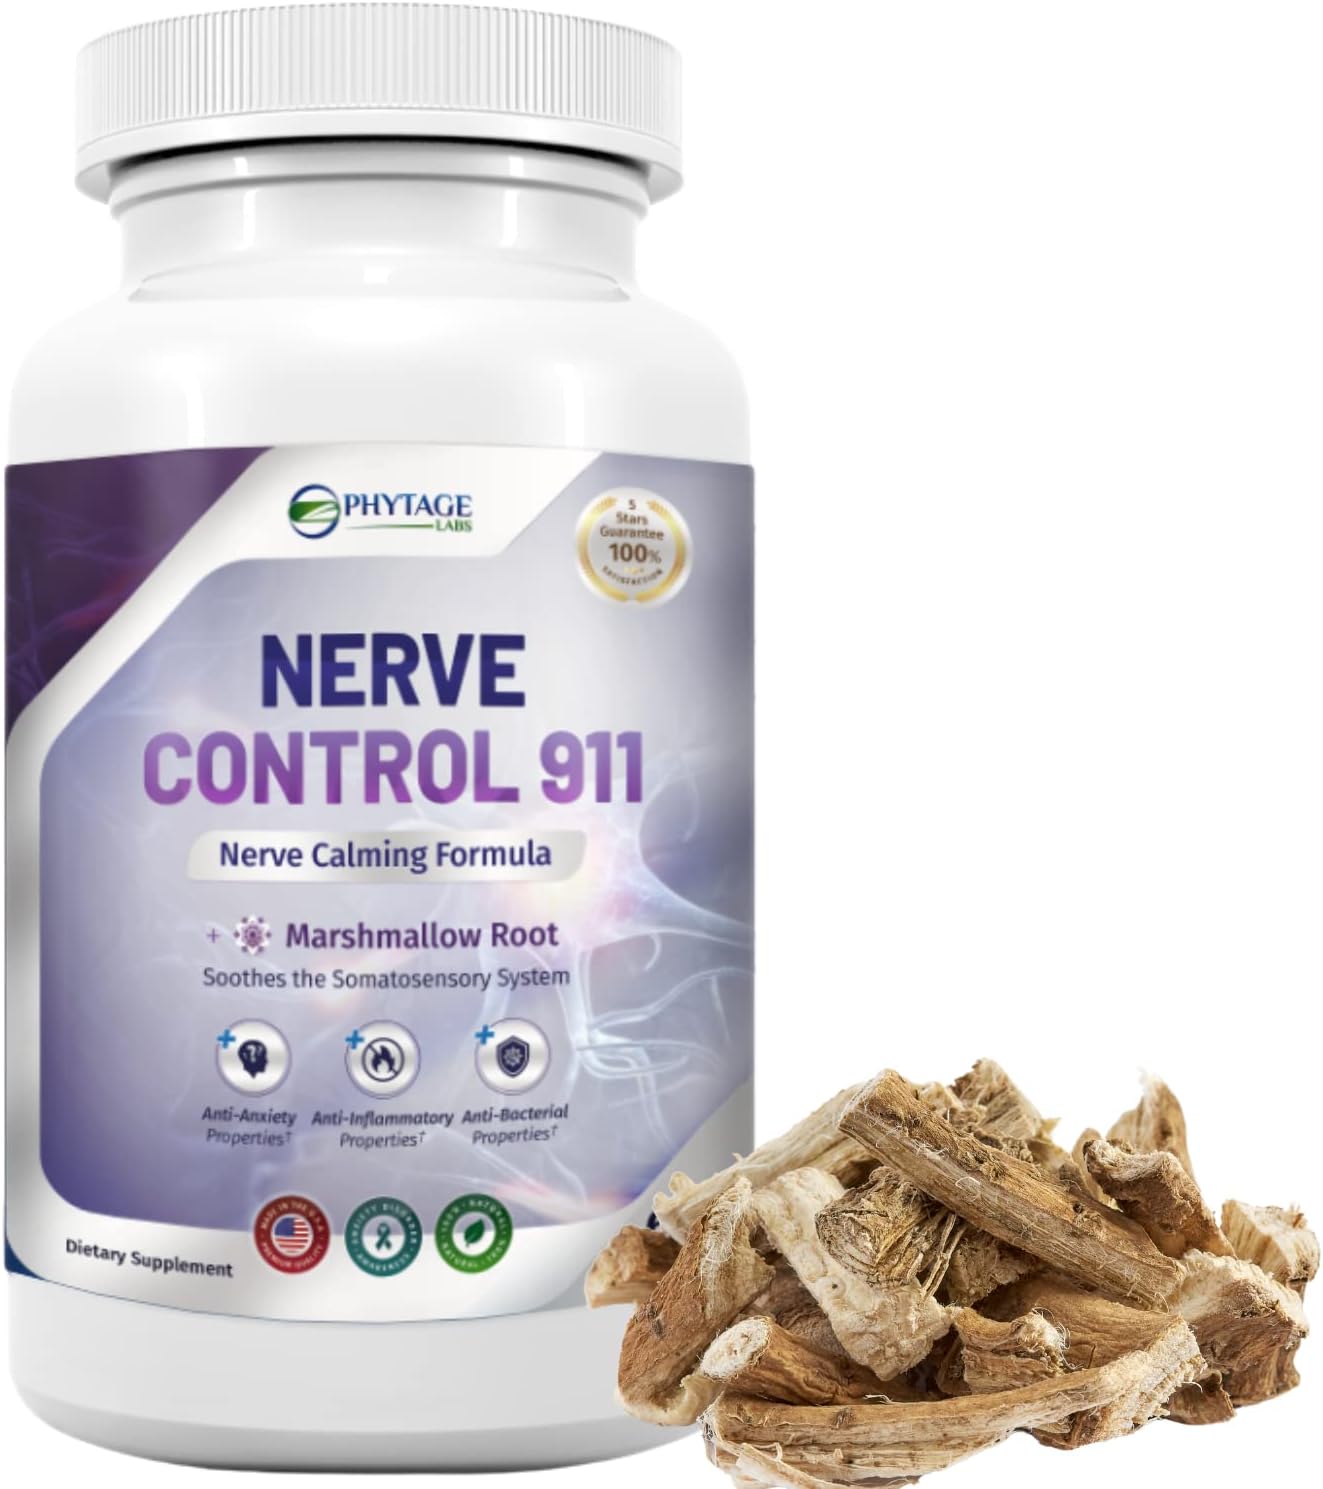 Are you experiencing nerve pain. Try this all-natural nerve support formula